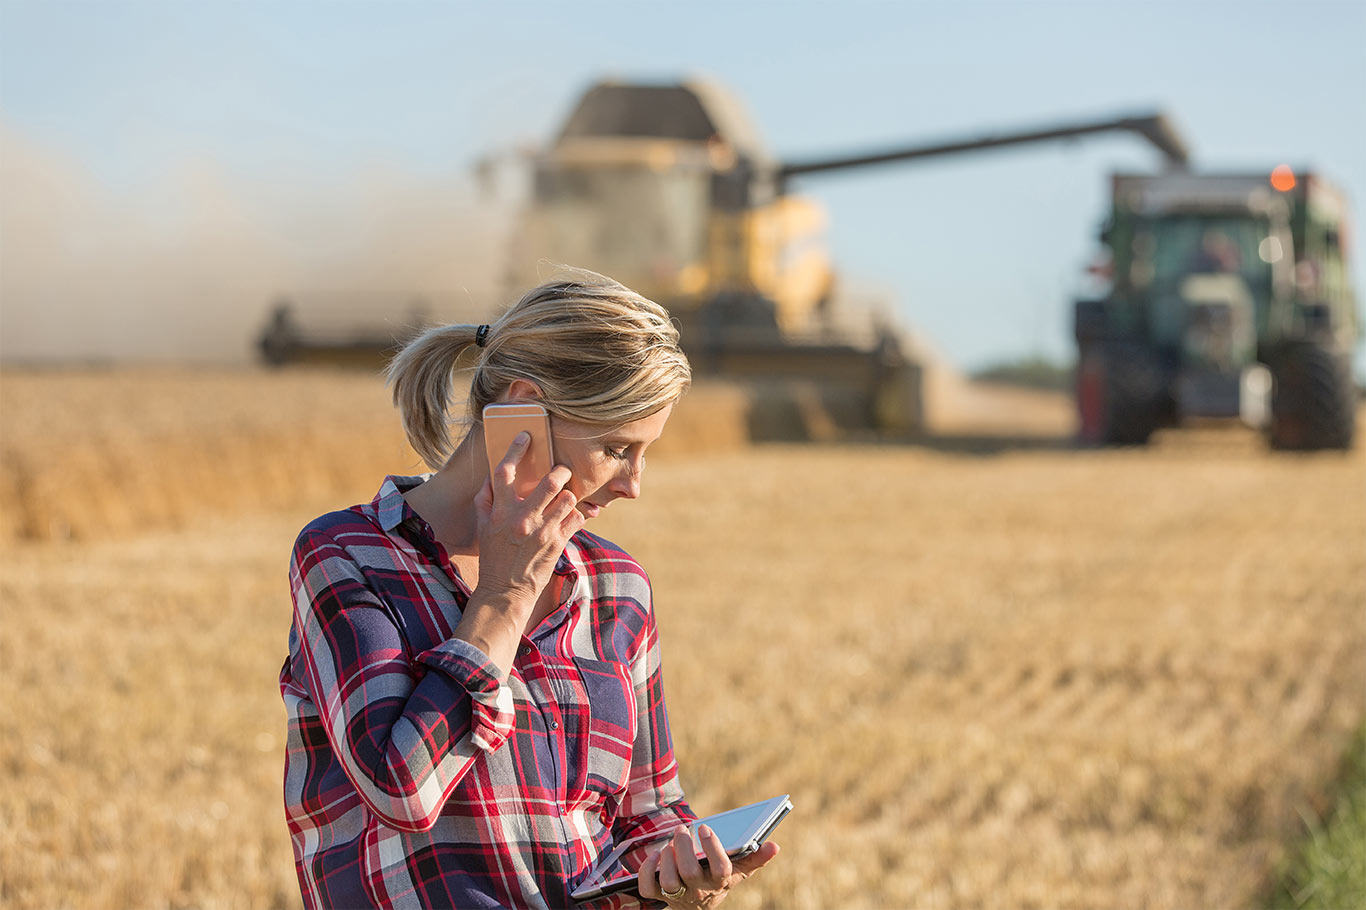 Farmer in wheatfield using a smartphone and tablet.